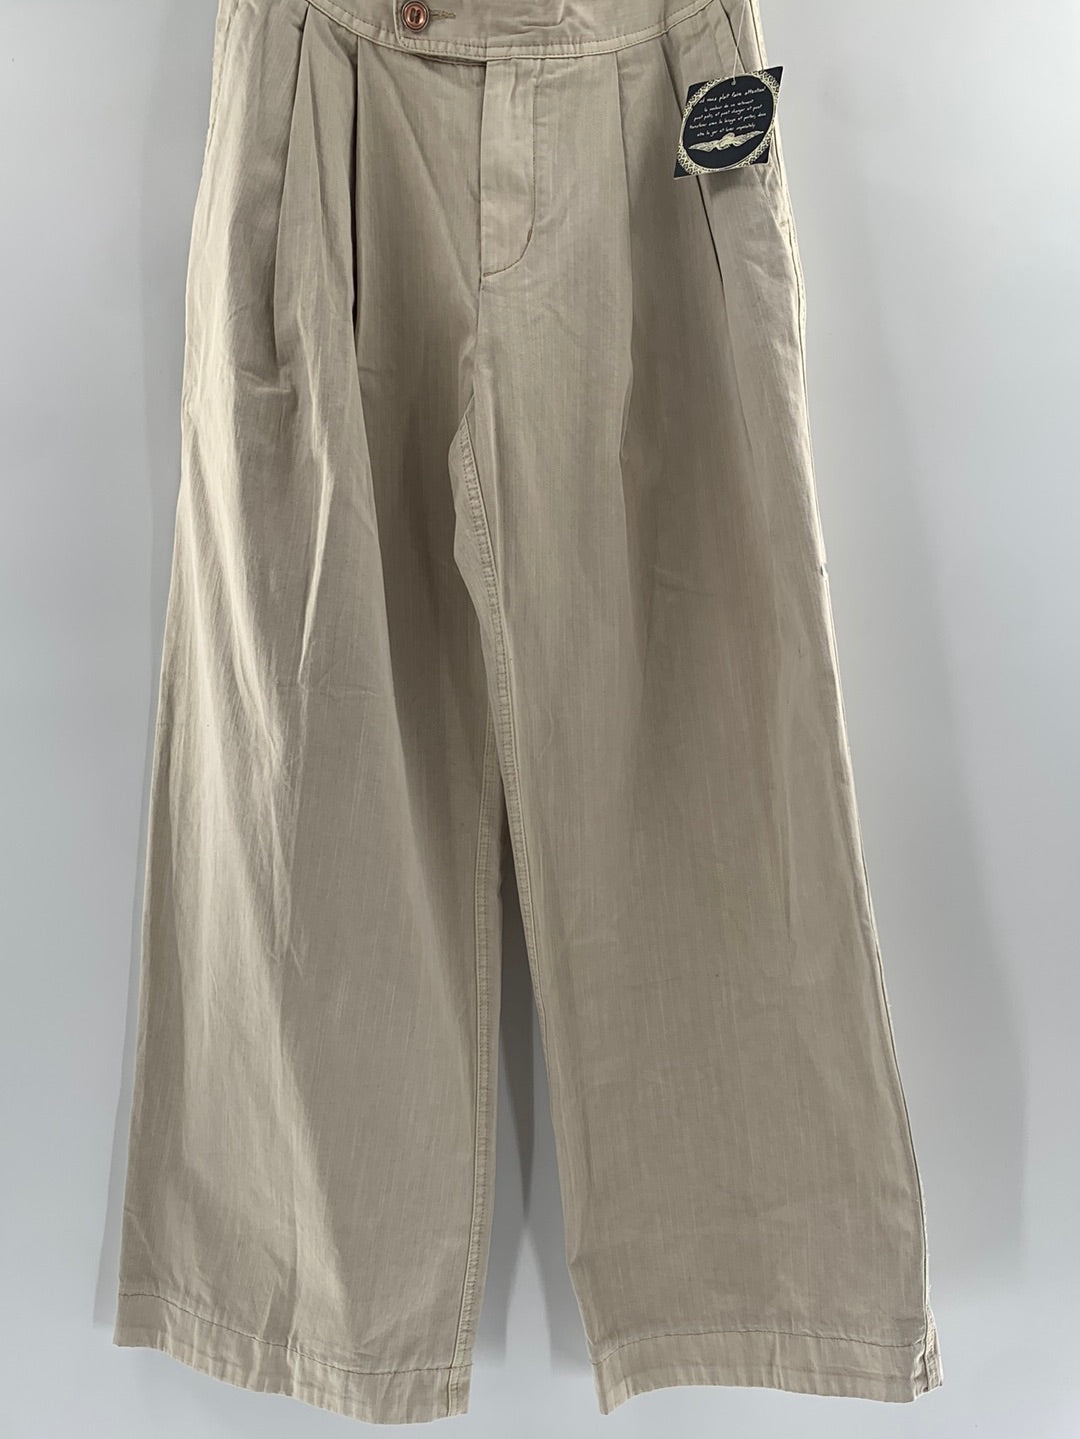 Free People Wide leg Pleated Trousers (Size 2)